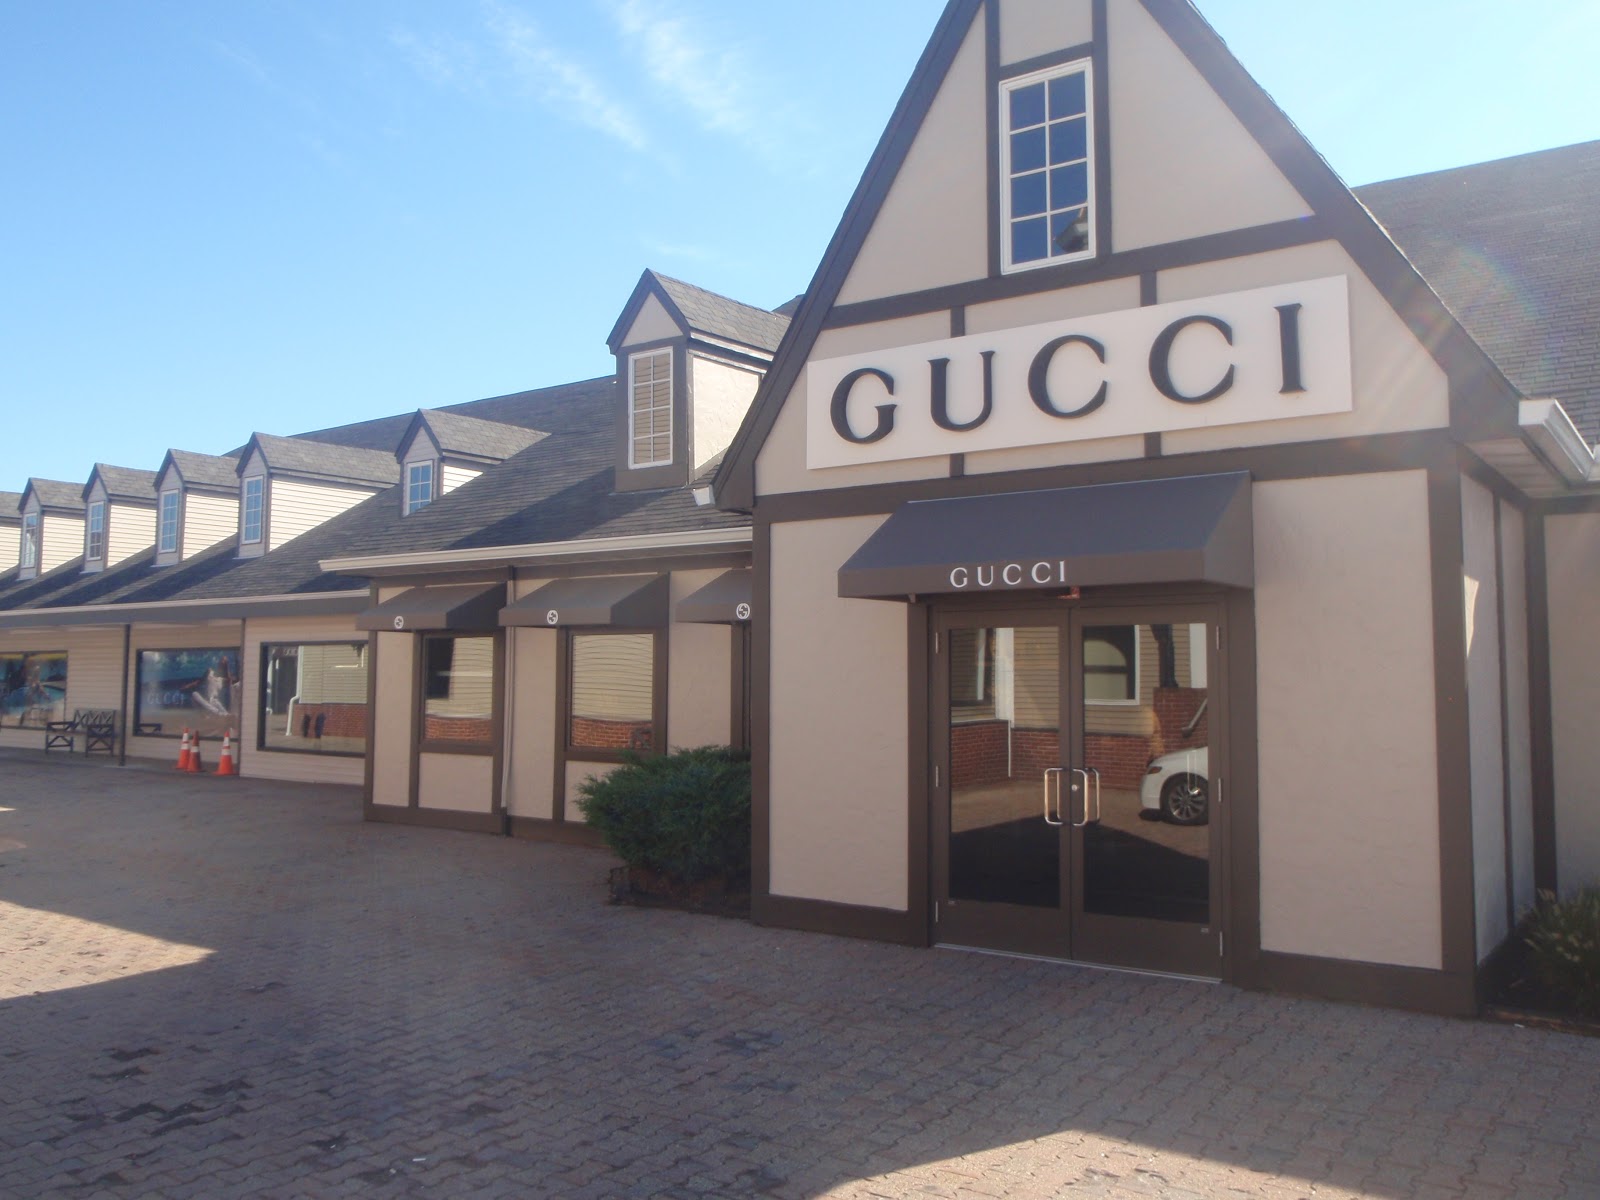 Woodbury Common LUXURY OUTLET Shopping Vlog ft. Gucci, Dior, Fendi